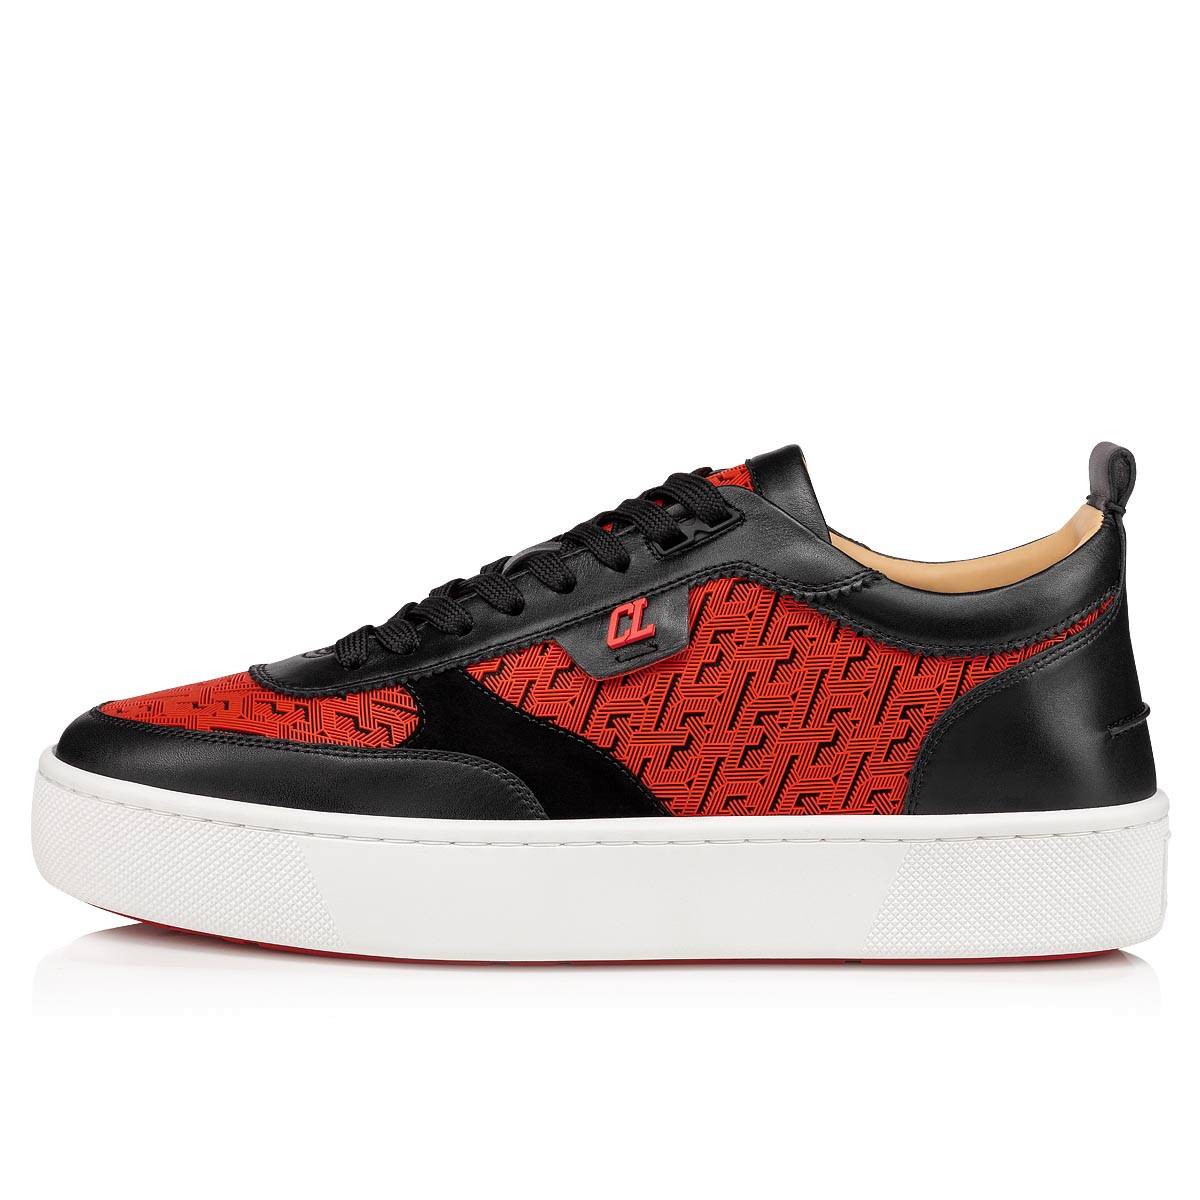 Red Bottoms Low Top Sneakers Retailers - Christian Louboutin 